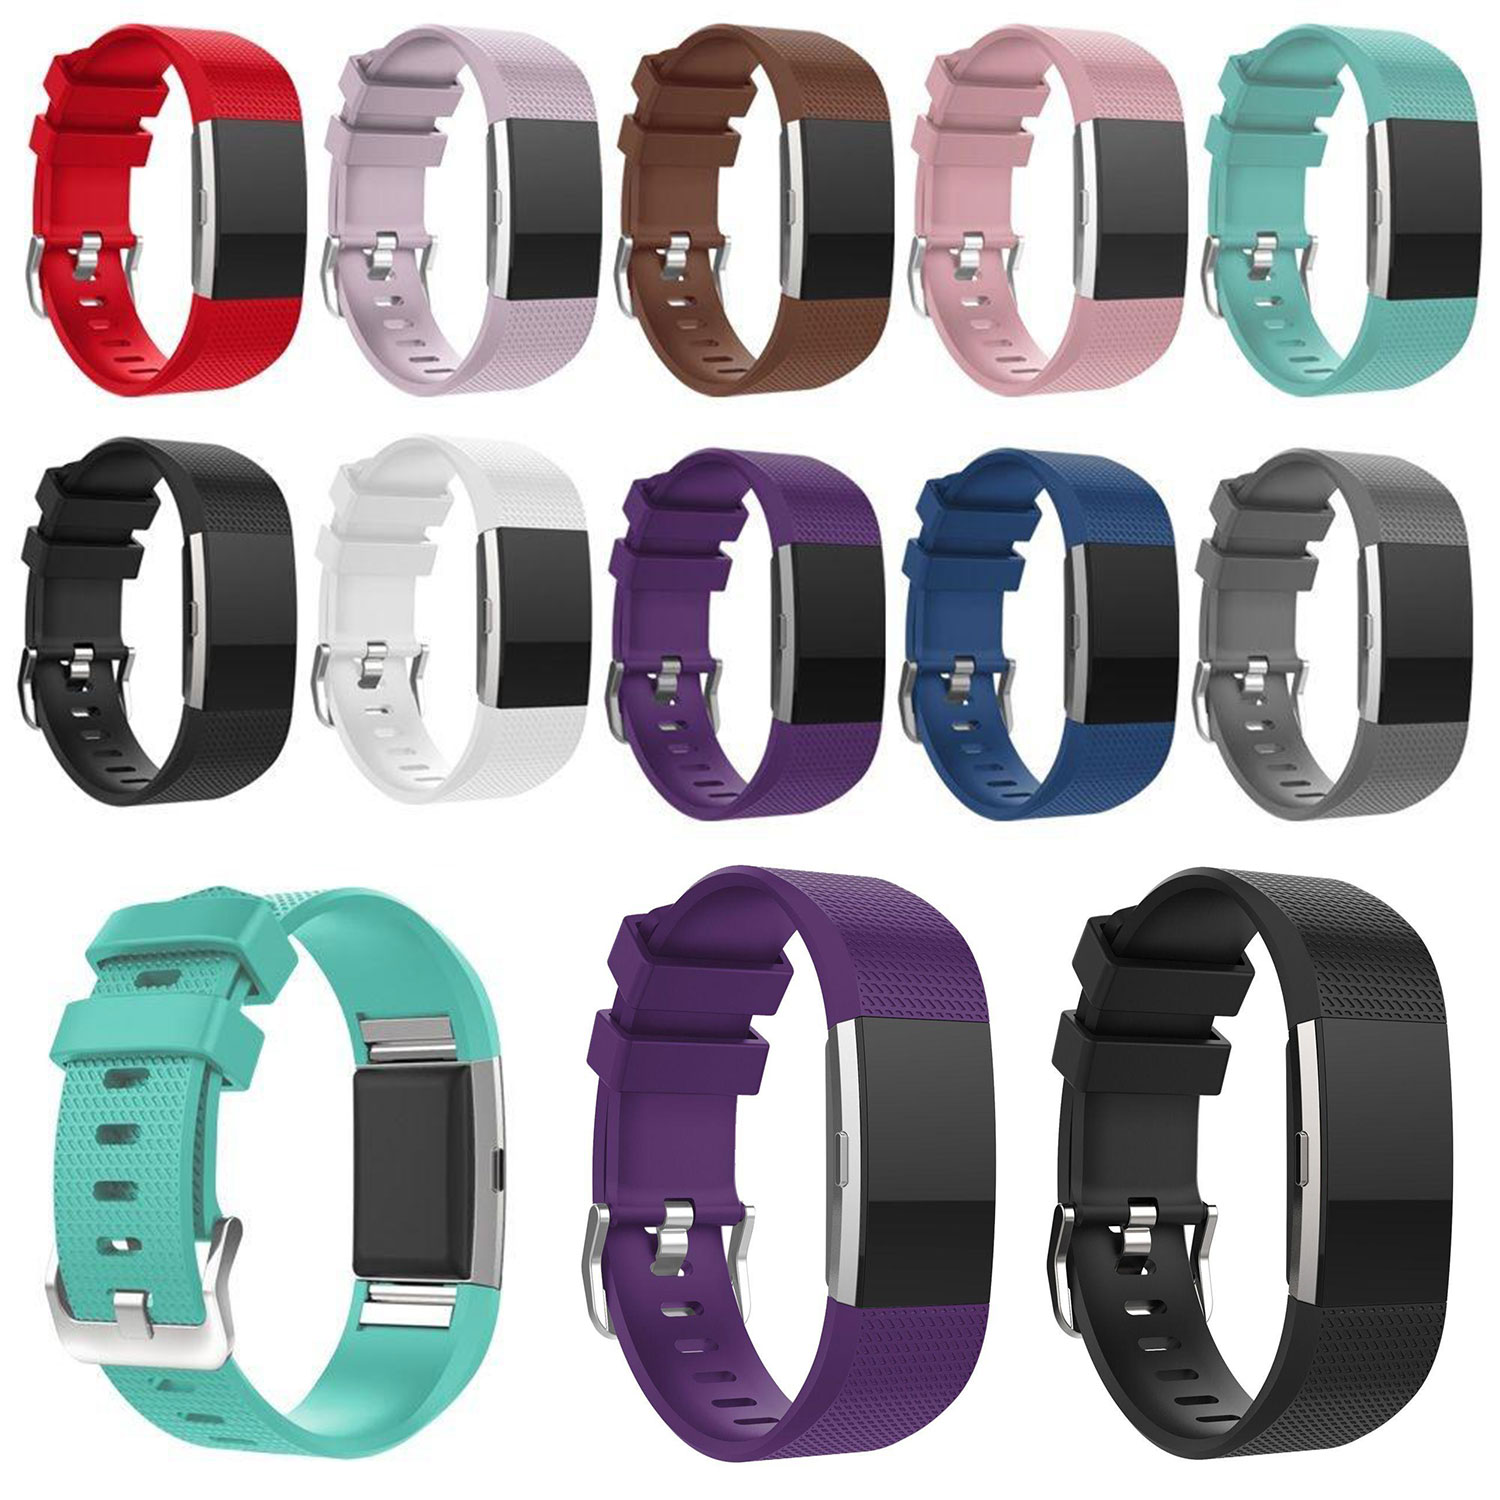 Pattern Bands for Fitbit Charge 2 Strap Secure Schnalle Replacement Wristband